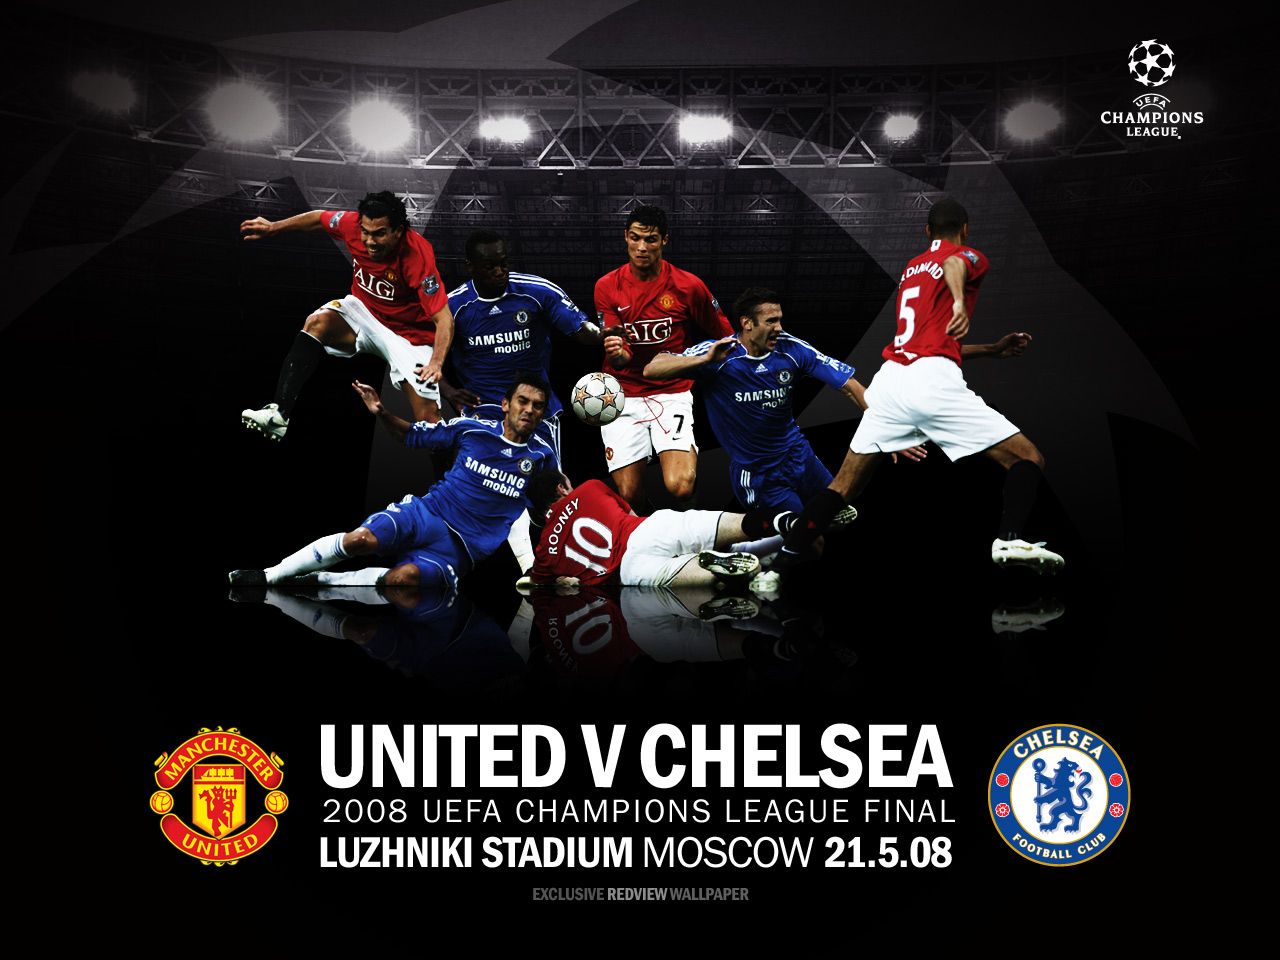 Manchester United Vs Chelsea 2011 2012 Wallpapers | Sports Mania1280 x 960